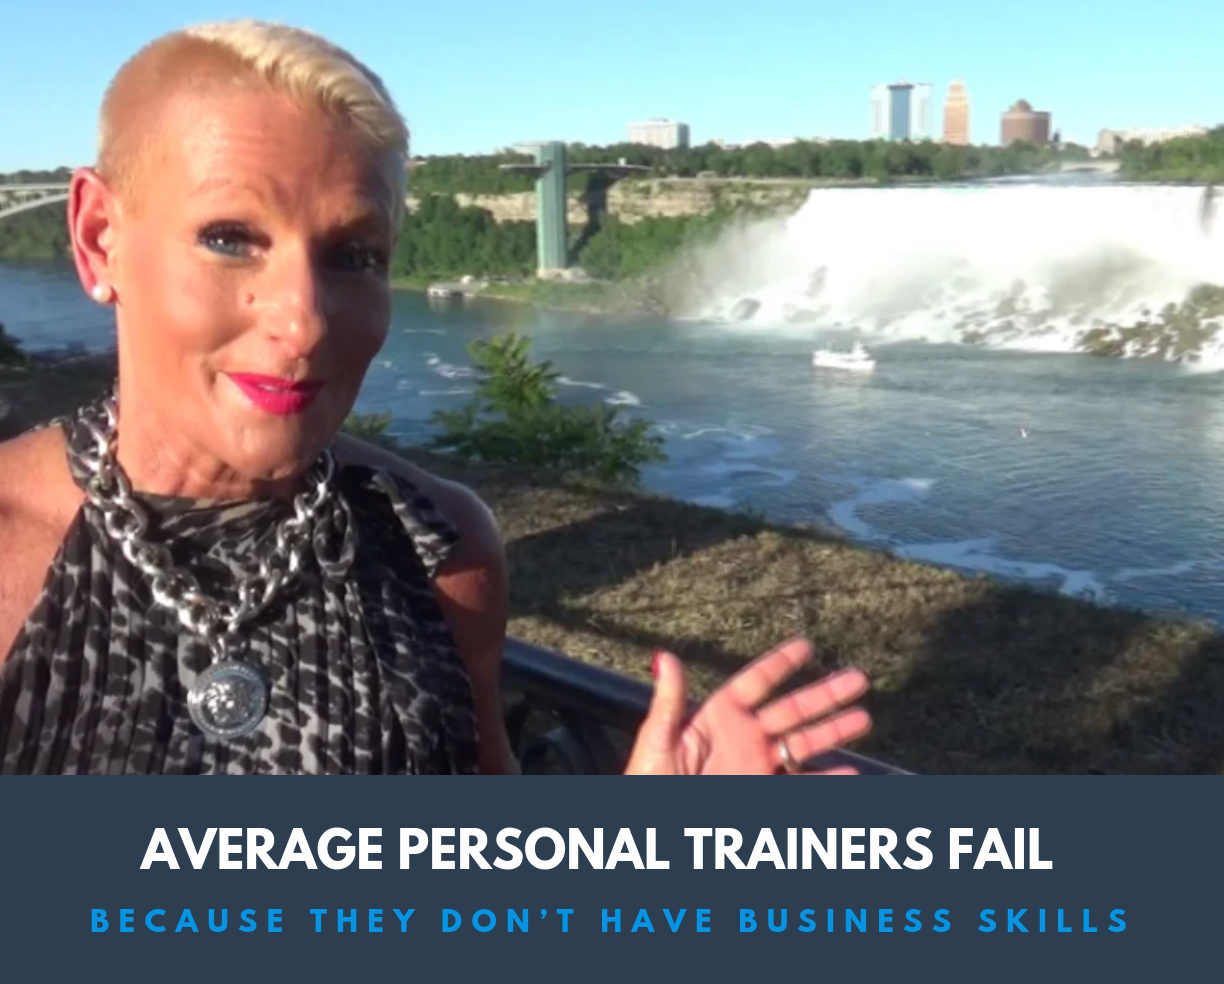 Average personal trainers fail because they don’t have business skills